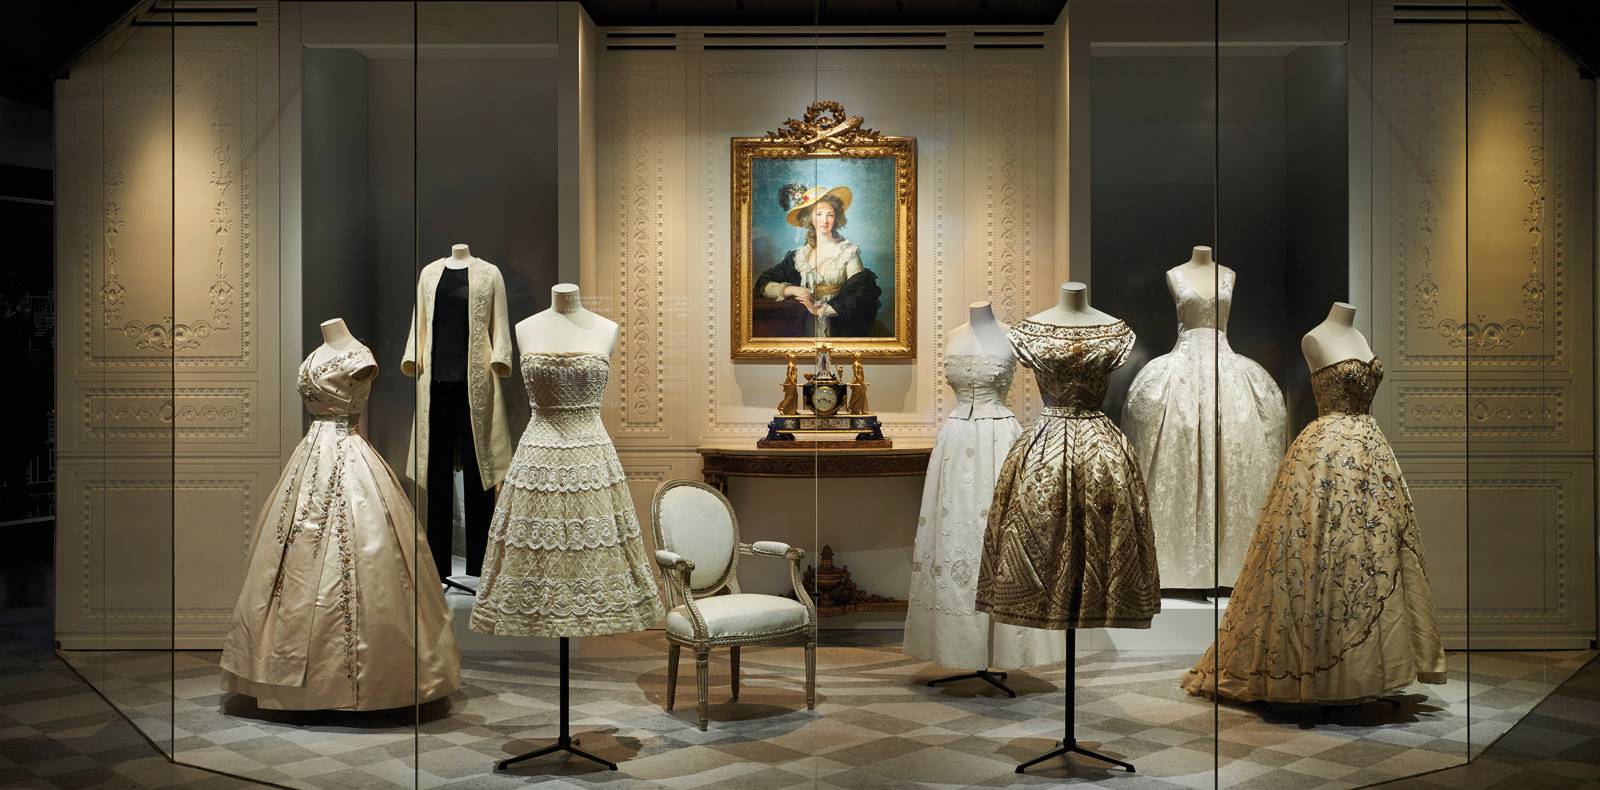 All about the exhibition of the month: Christian Dior, couturier du rêve